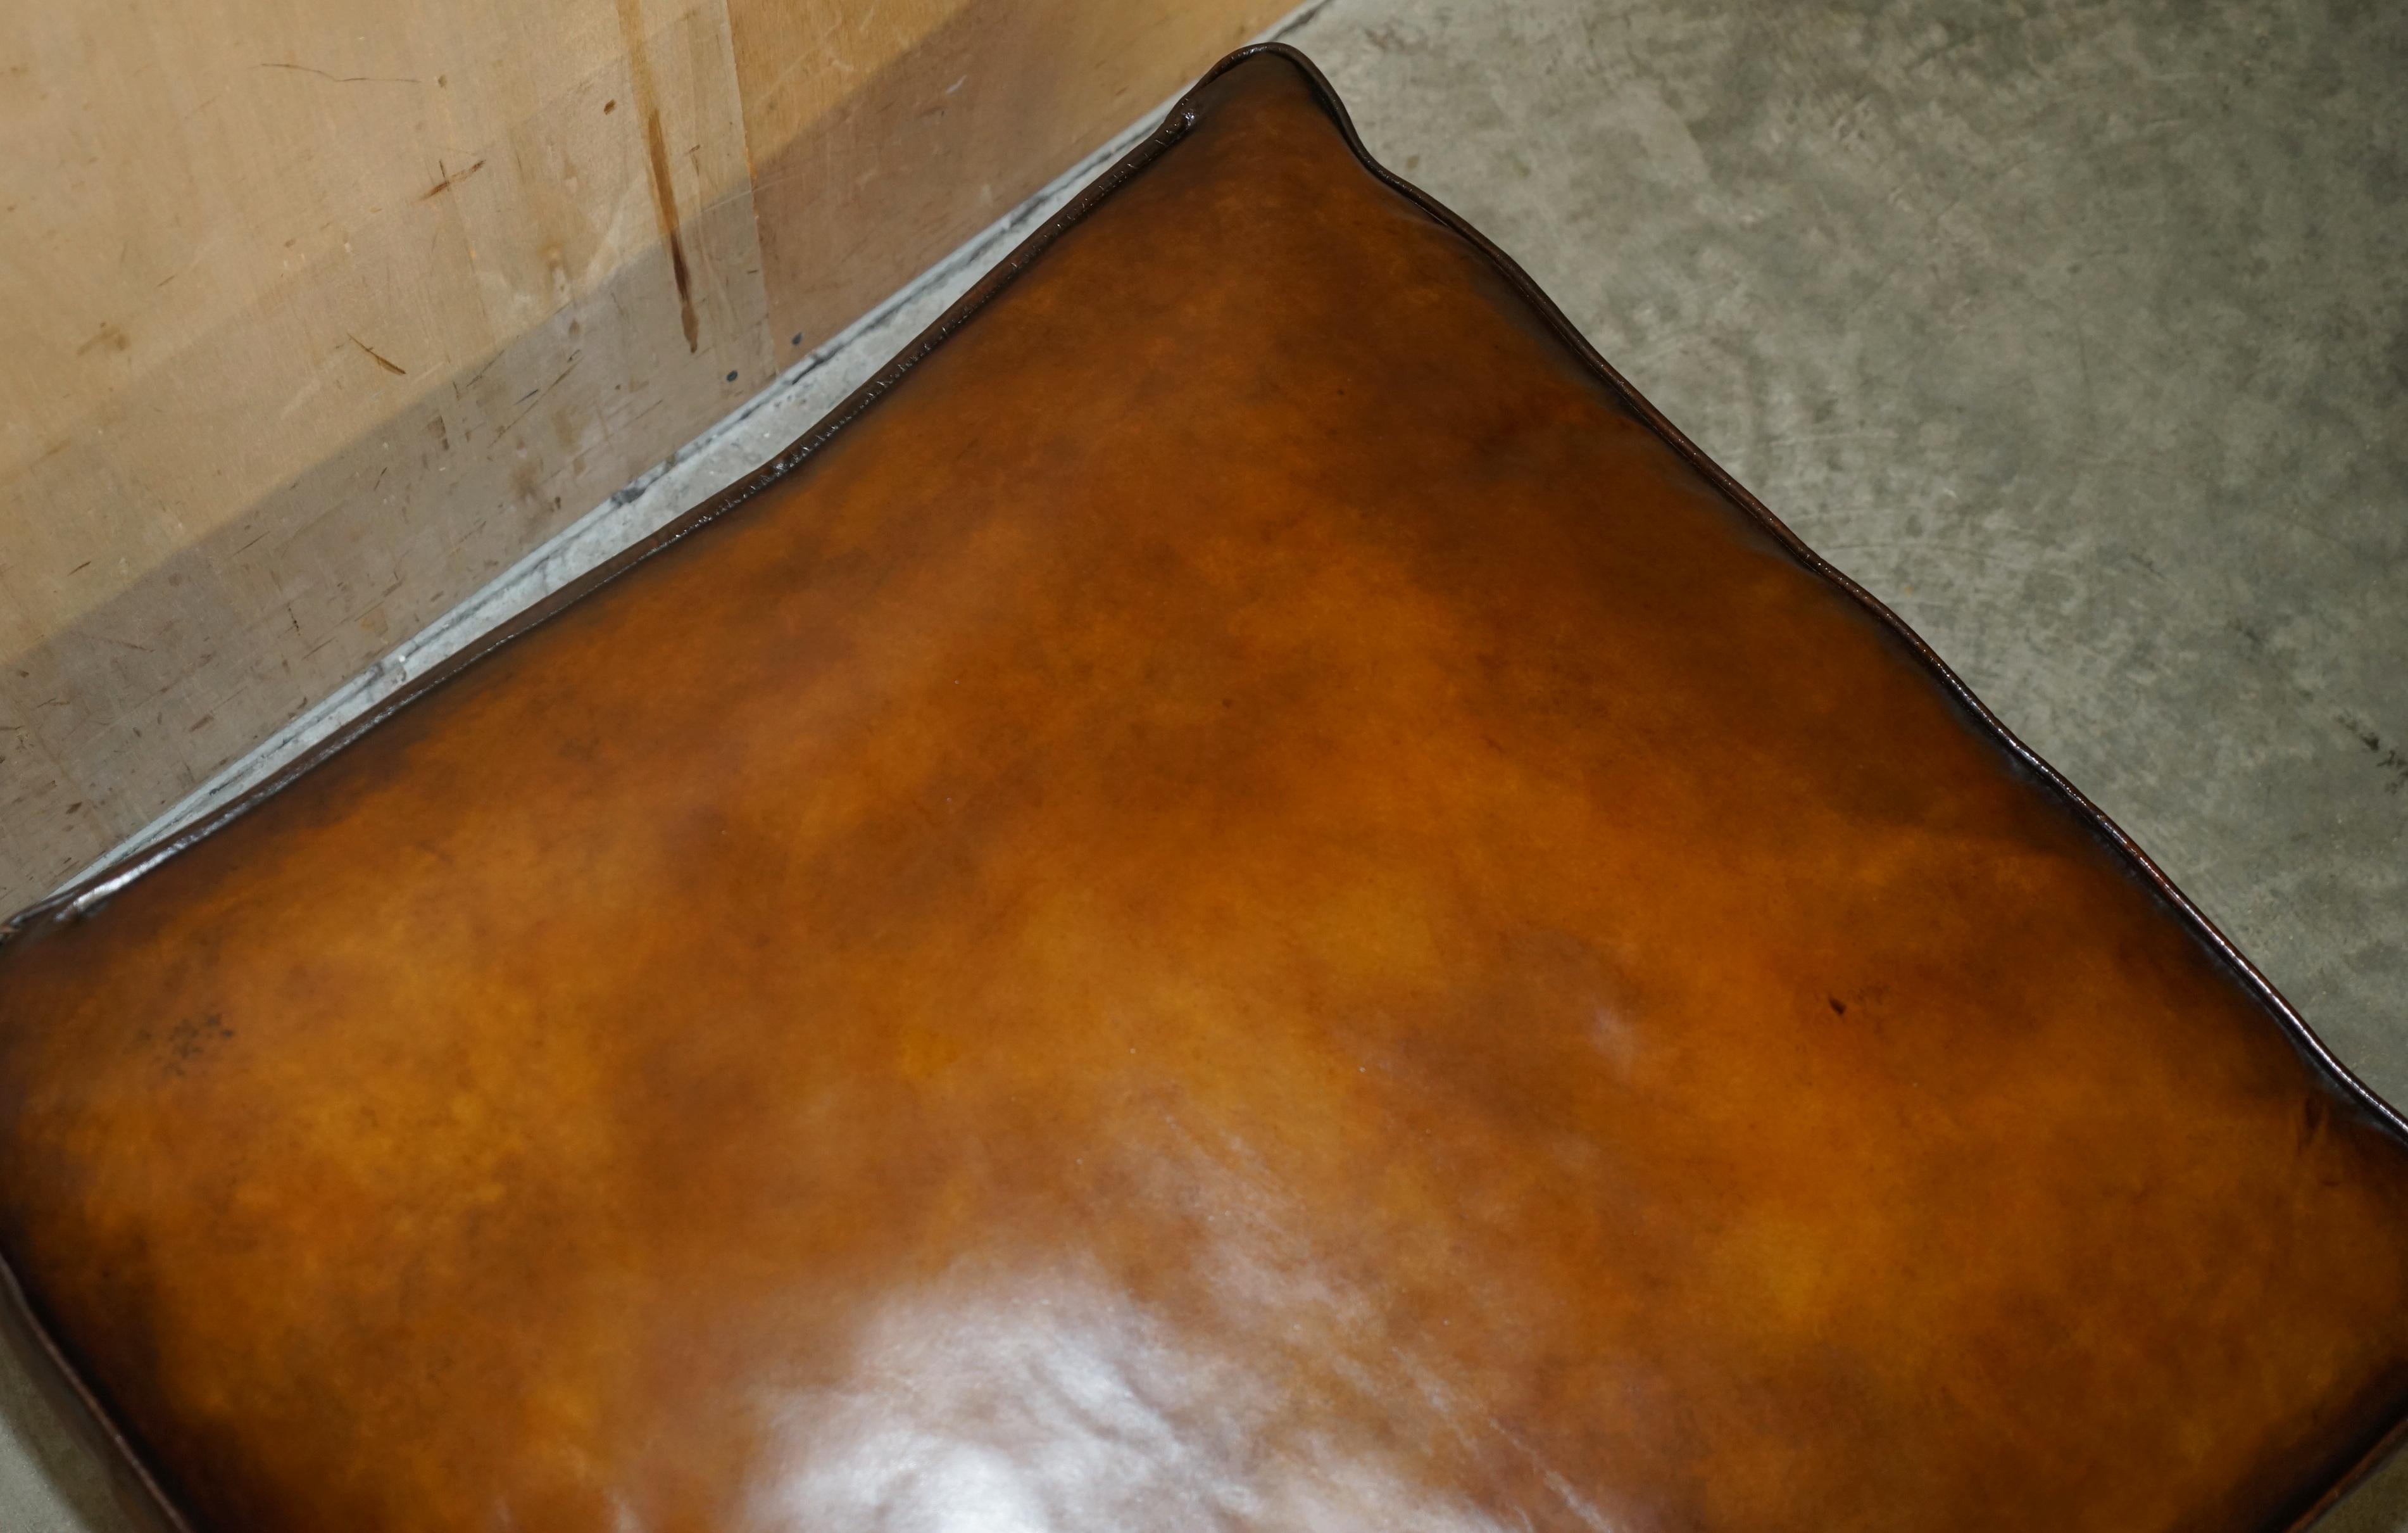 EXTRA LARGE FEATHER SEATHER SEAT RESTORED BROWN LEATHER OTTOMAN FOOTSTOOL PART OF SUiTE (Handgefertigt) im Angebot